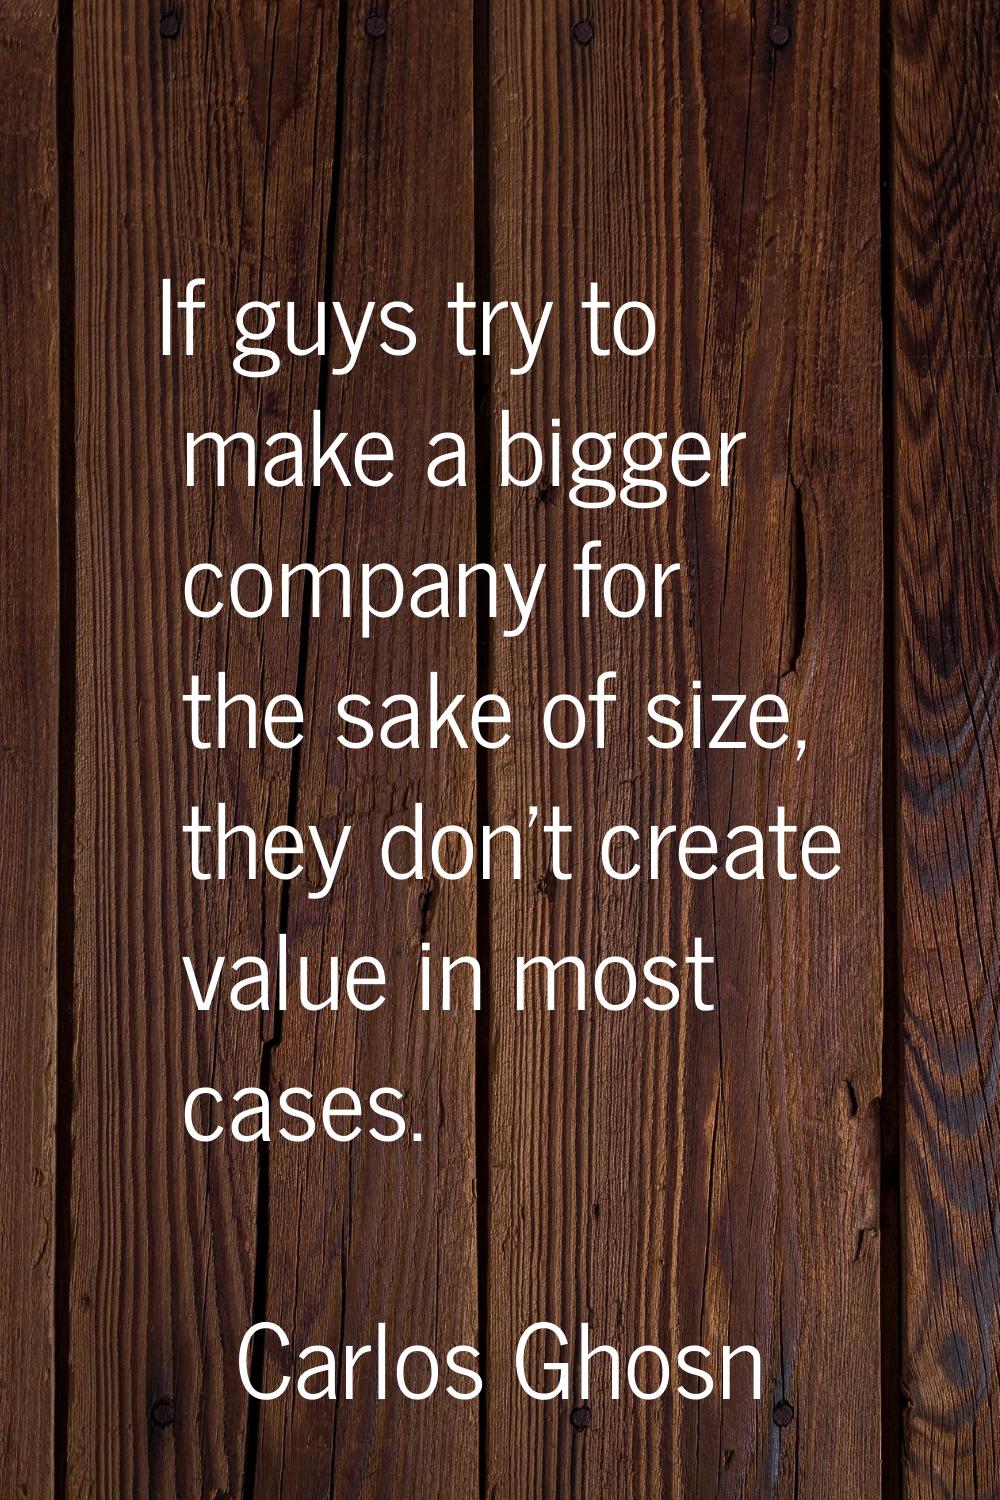 If guys try to make a bigger company for the sake of size, they don't create value in most cases.